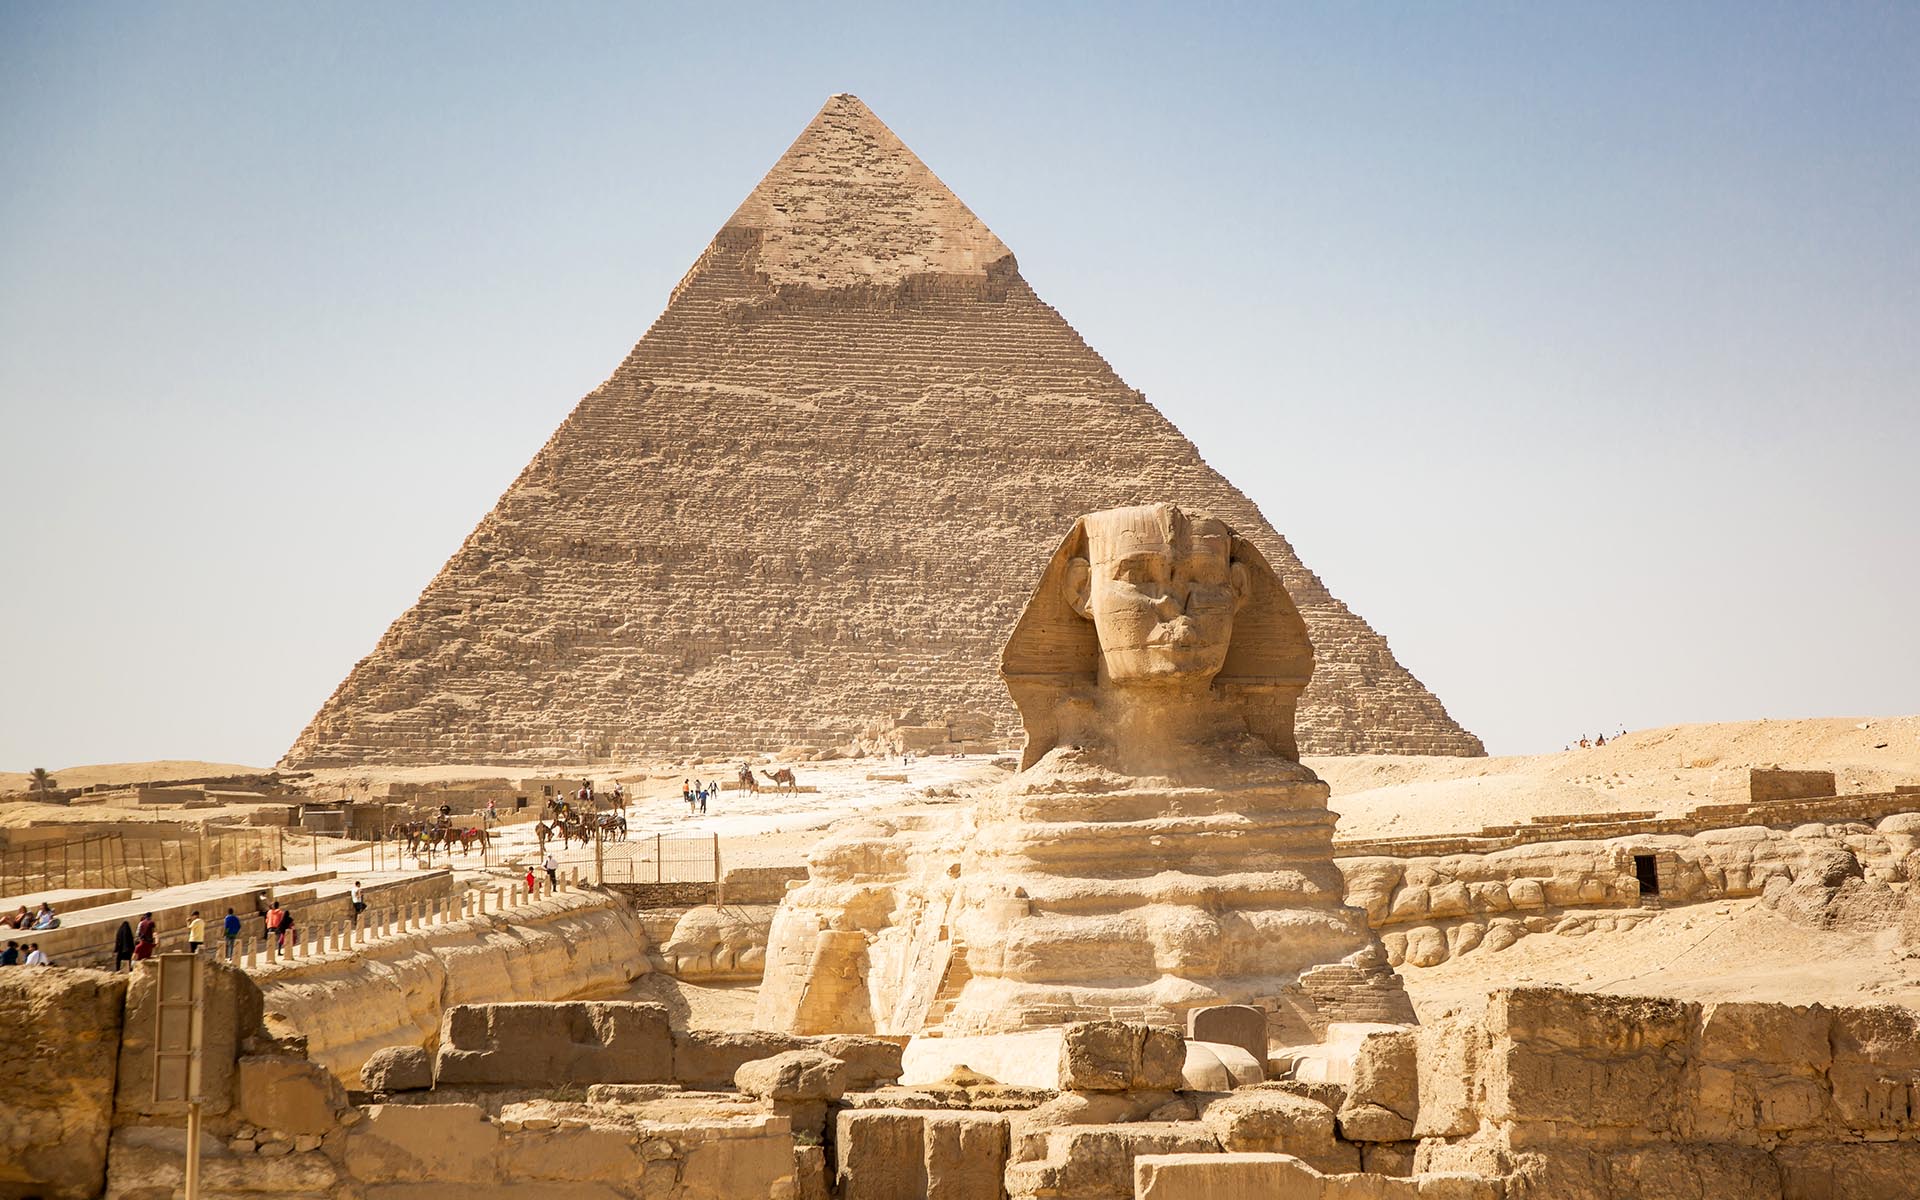 Great Pyramids of Giza and the Sphinx, part of Ker & Downey Africa’s best Africa safaris of 2022.